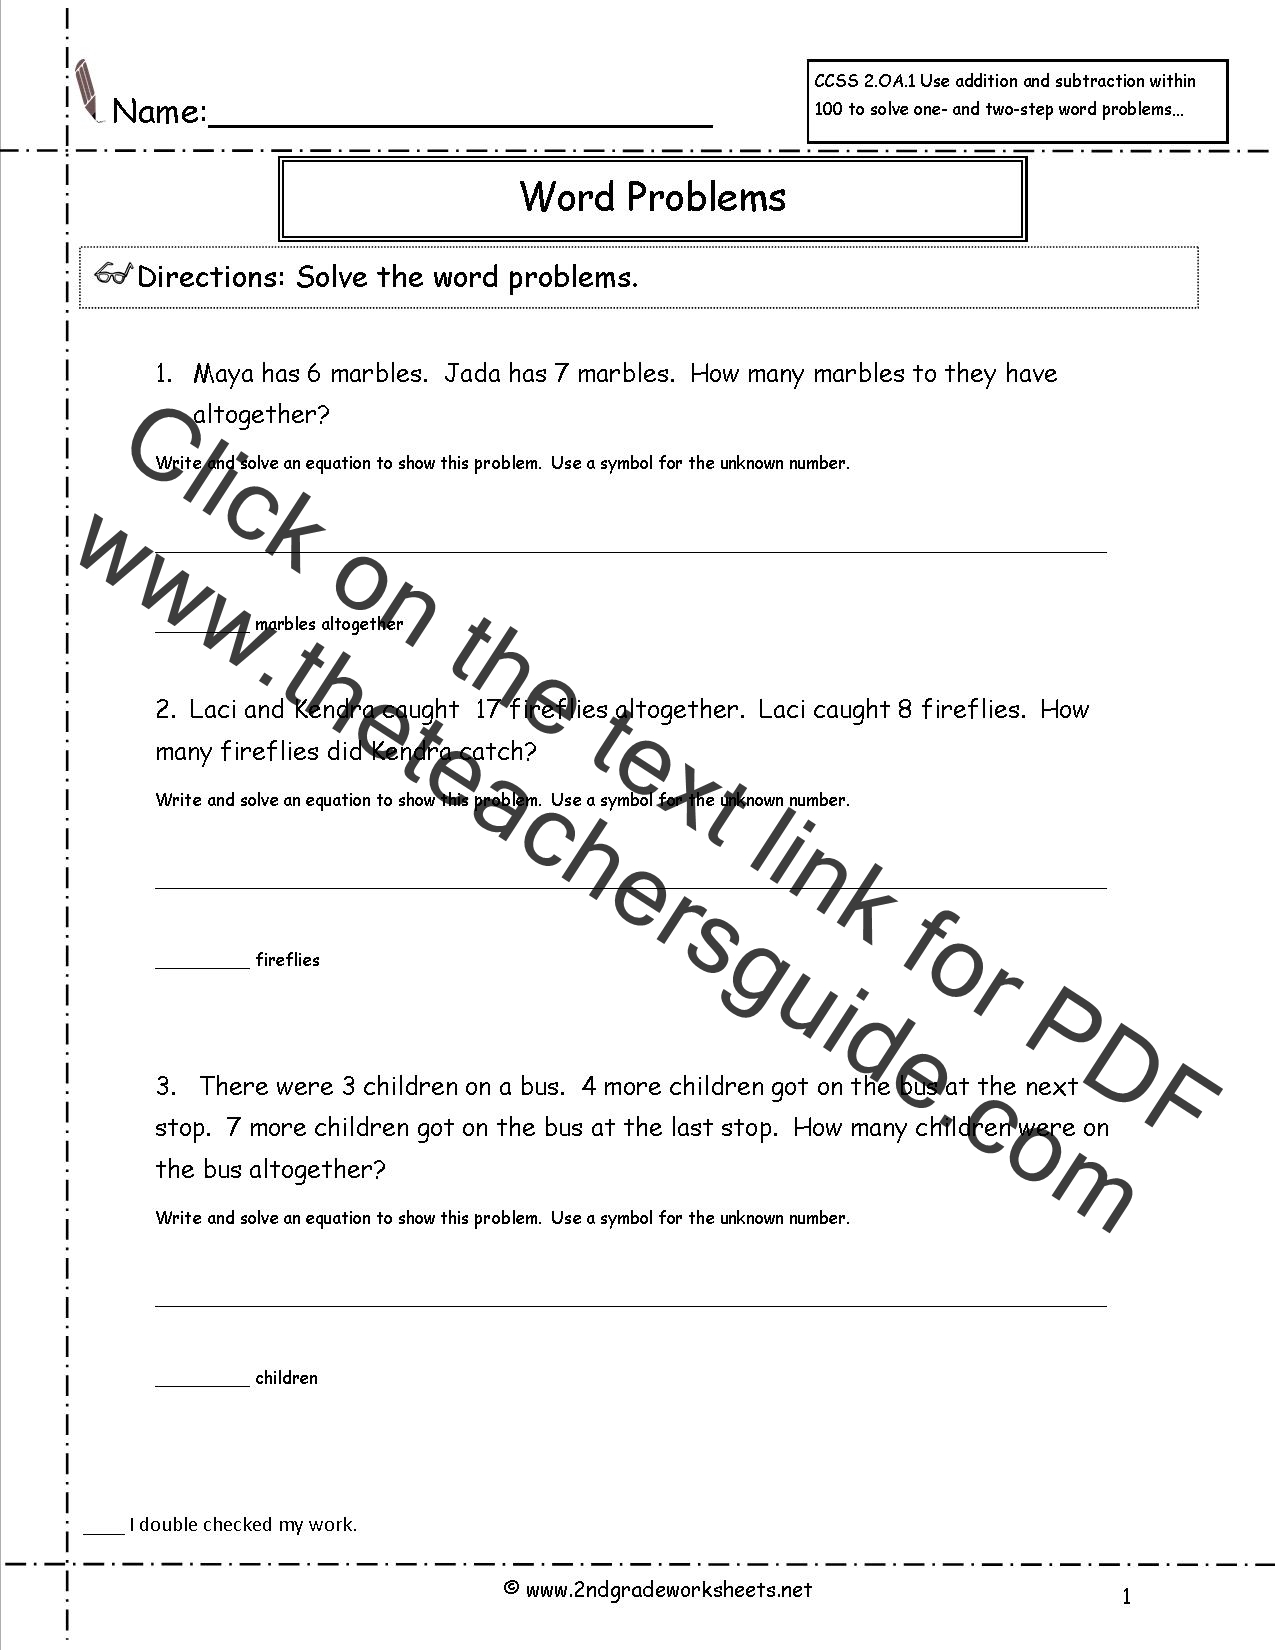 ccss-2-oa-1-worksheets-addition-and-subtraction-word-problems-worksheets